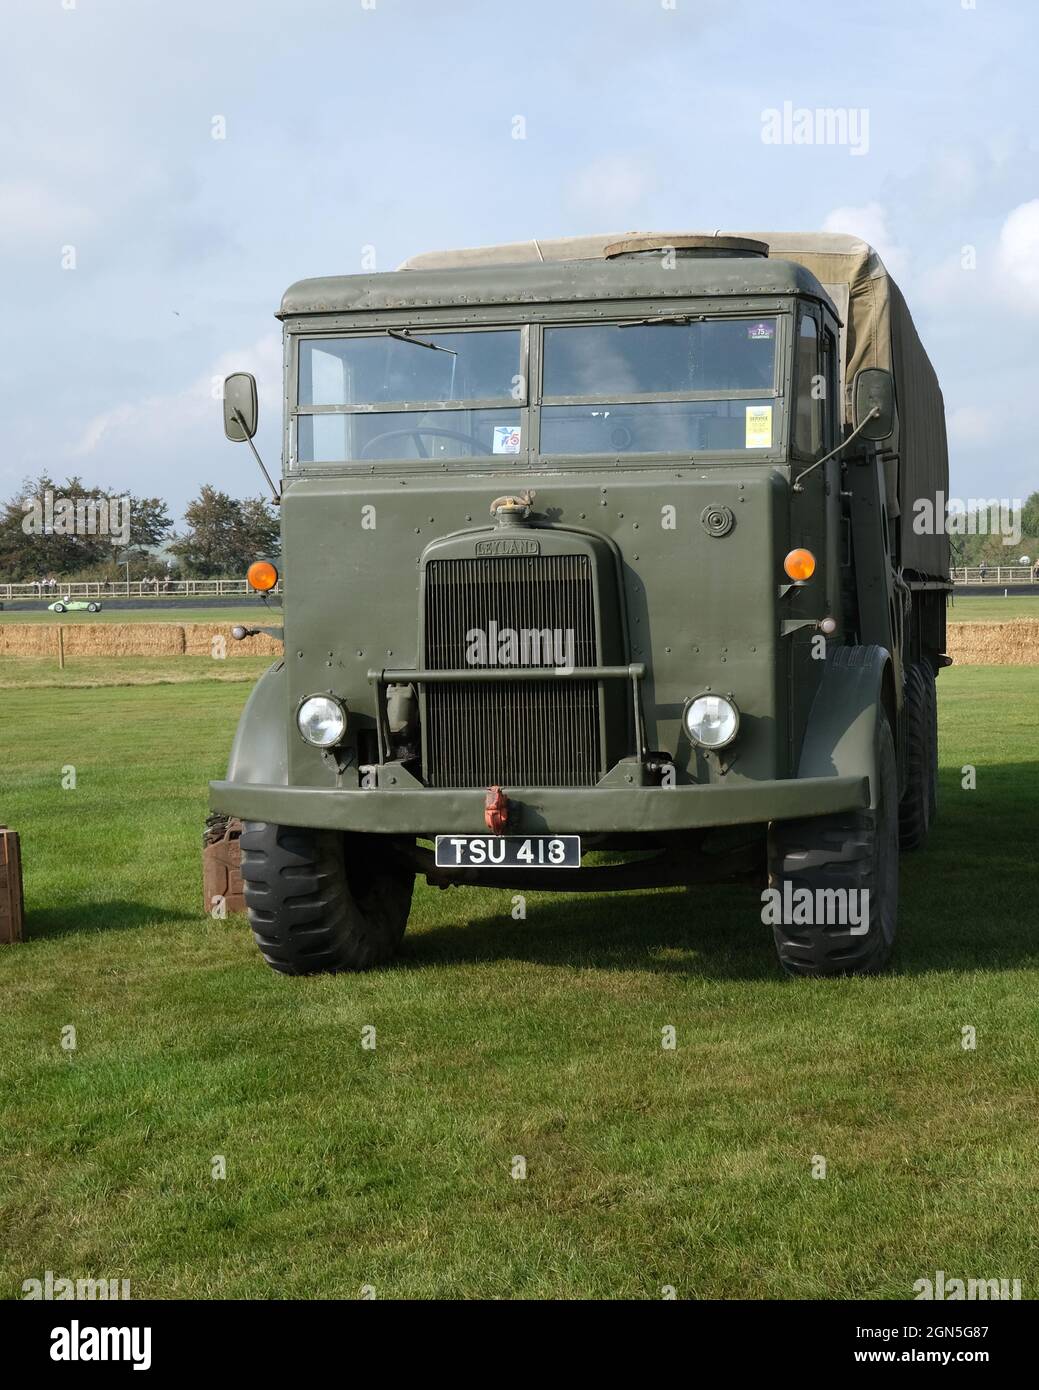 September 2021 - Leyland Hippo Heavy British transport trucks  Military display at The Goodwood Revival race meeting for vintage cars and motorbikes. Stock Photo